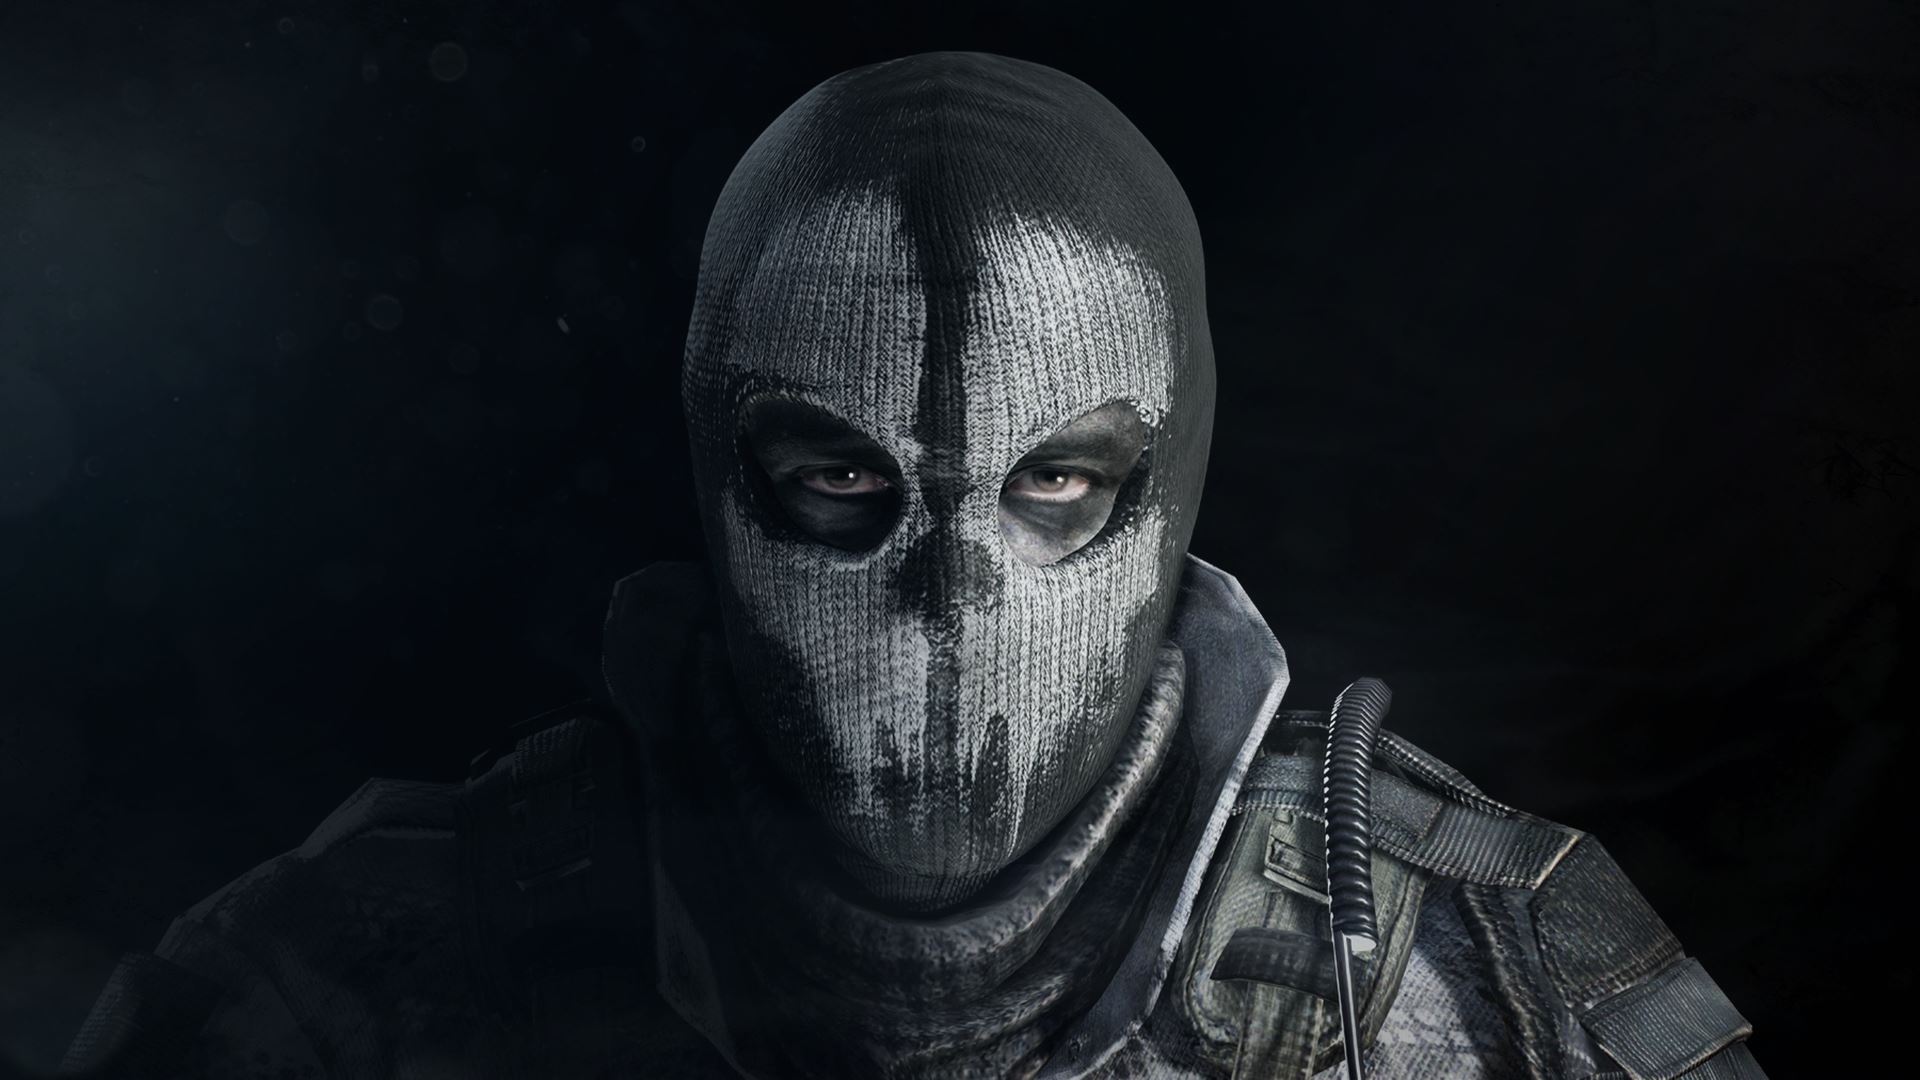 skull mask wallpapers wallpaper cave on call of duty ghost mask wallpapers